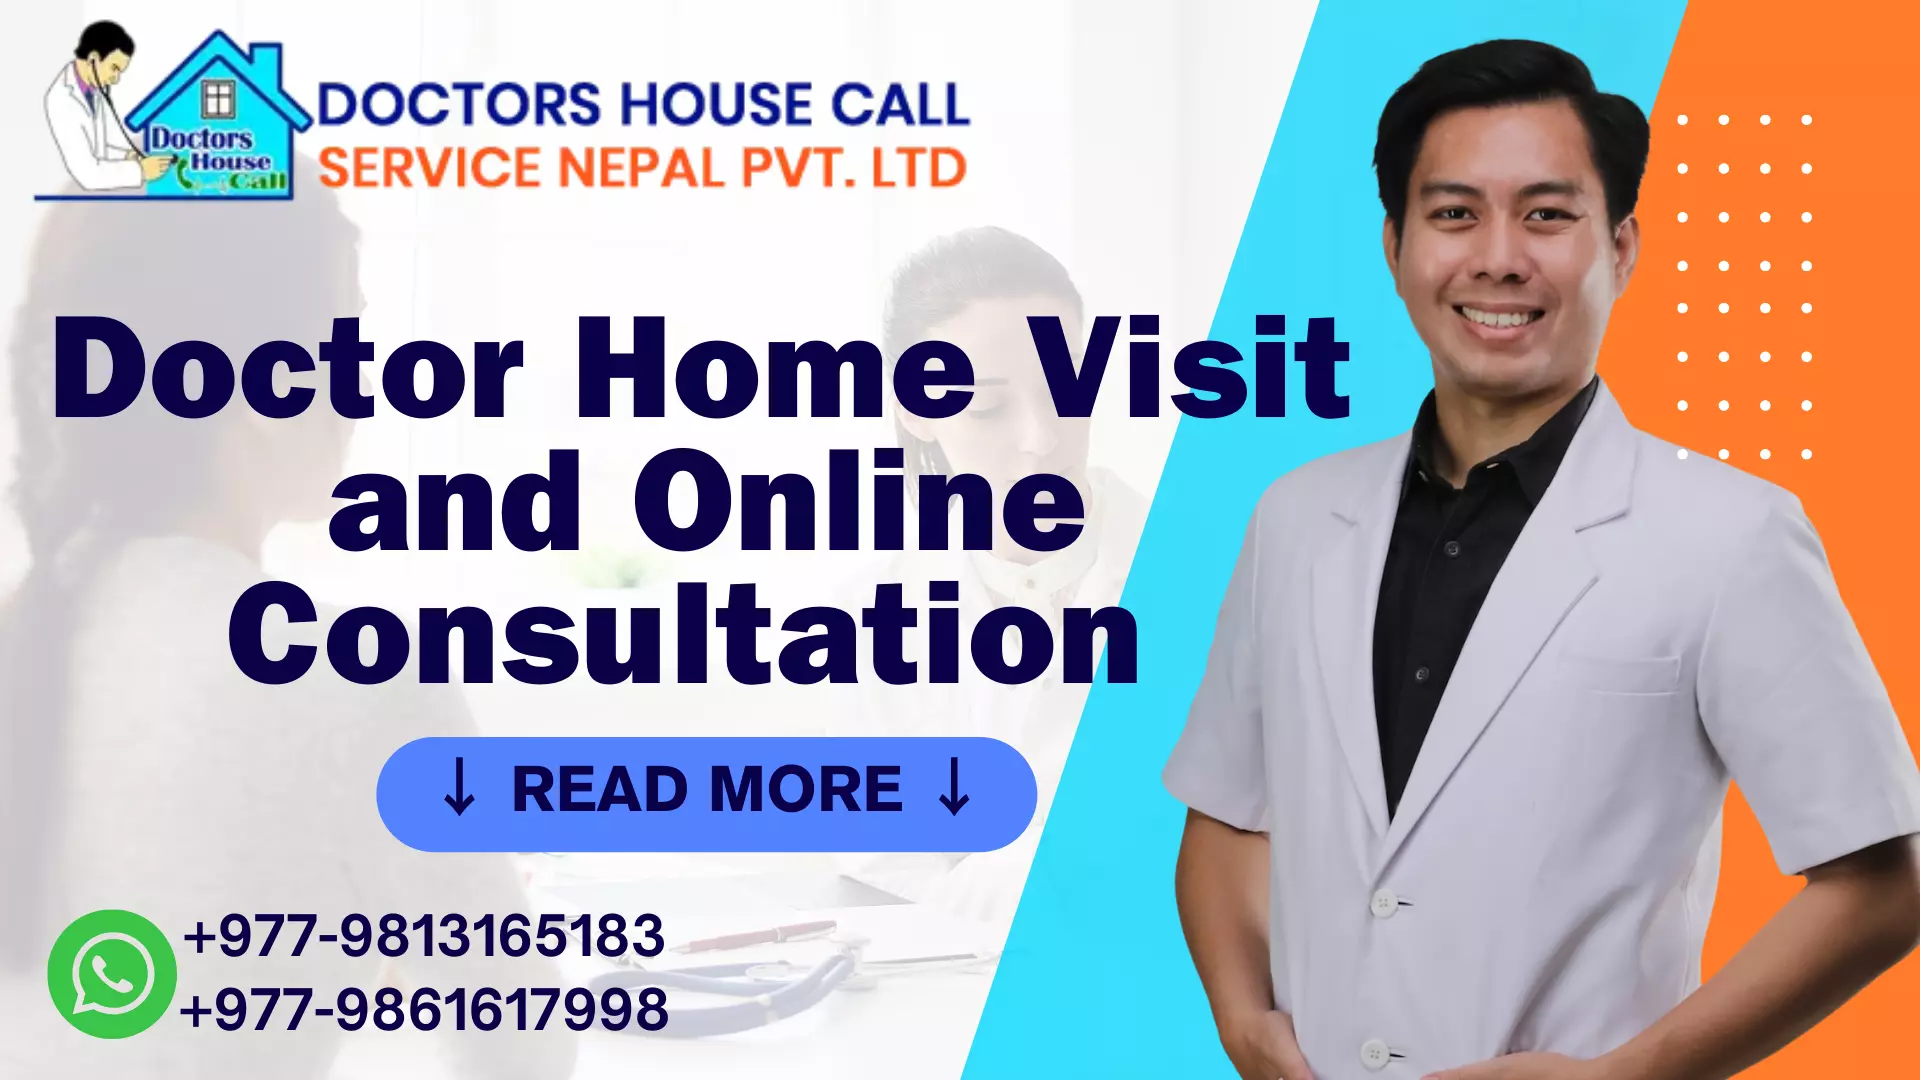 Doctor Visit Home and Online Consultation - Doctors House Call Service Nepal